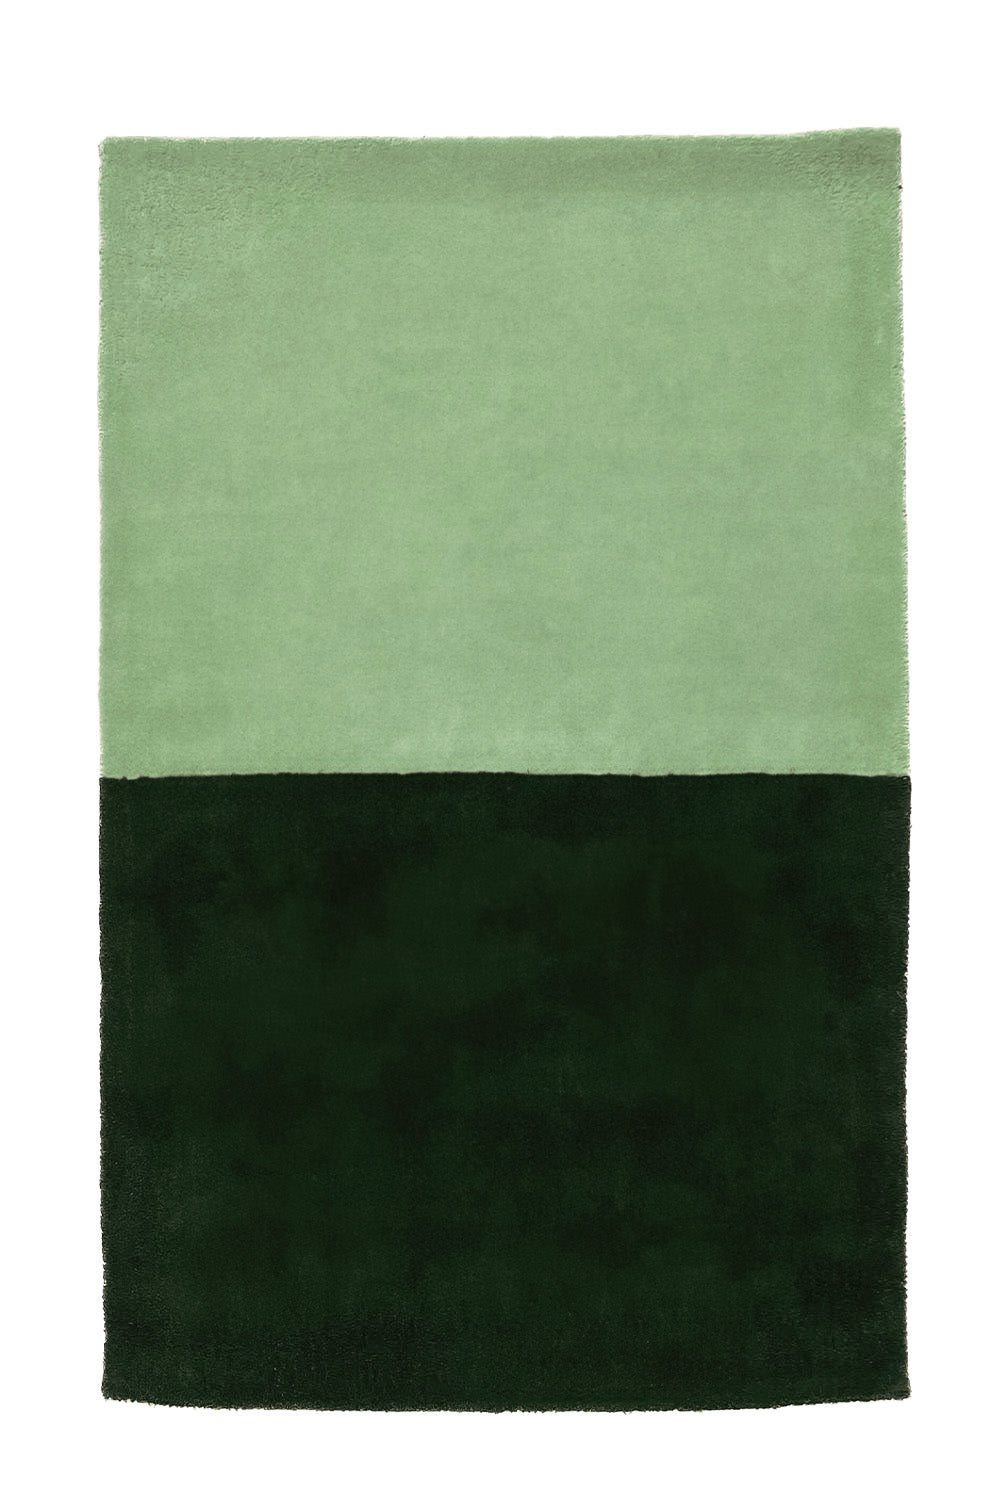 Classic Color Block Hand Tufted Wool Rug in Green by Jubi